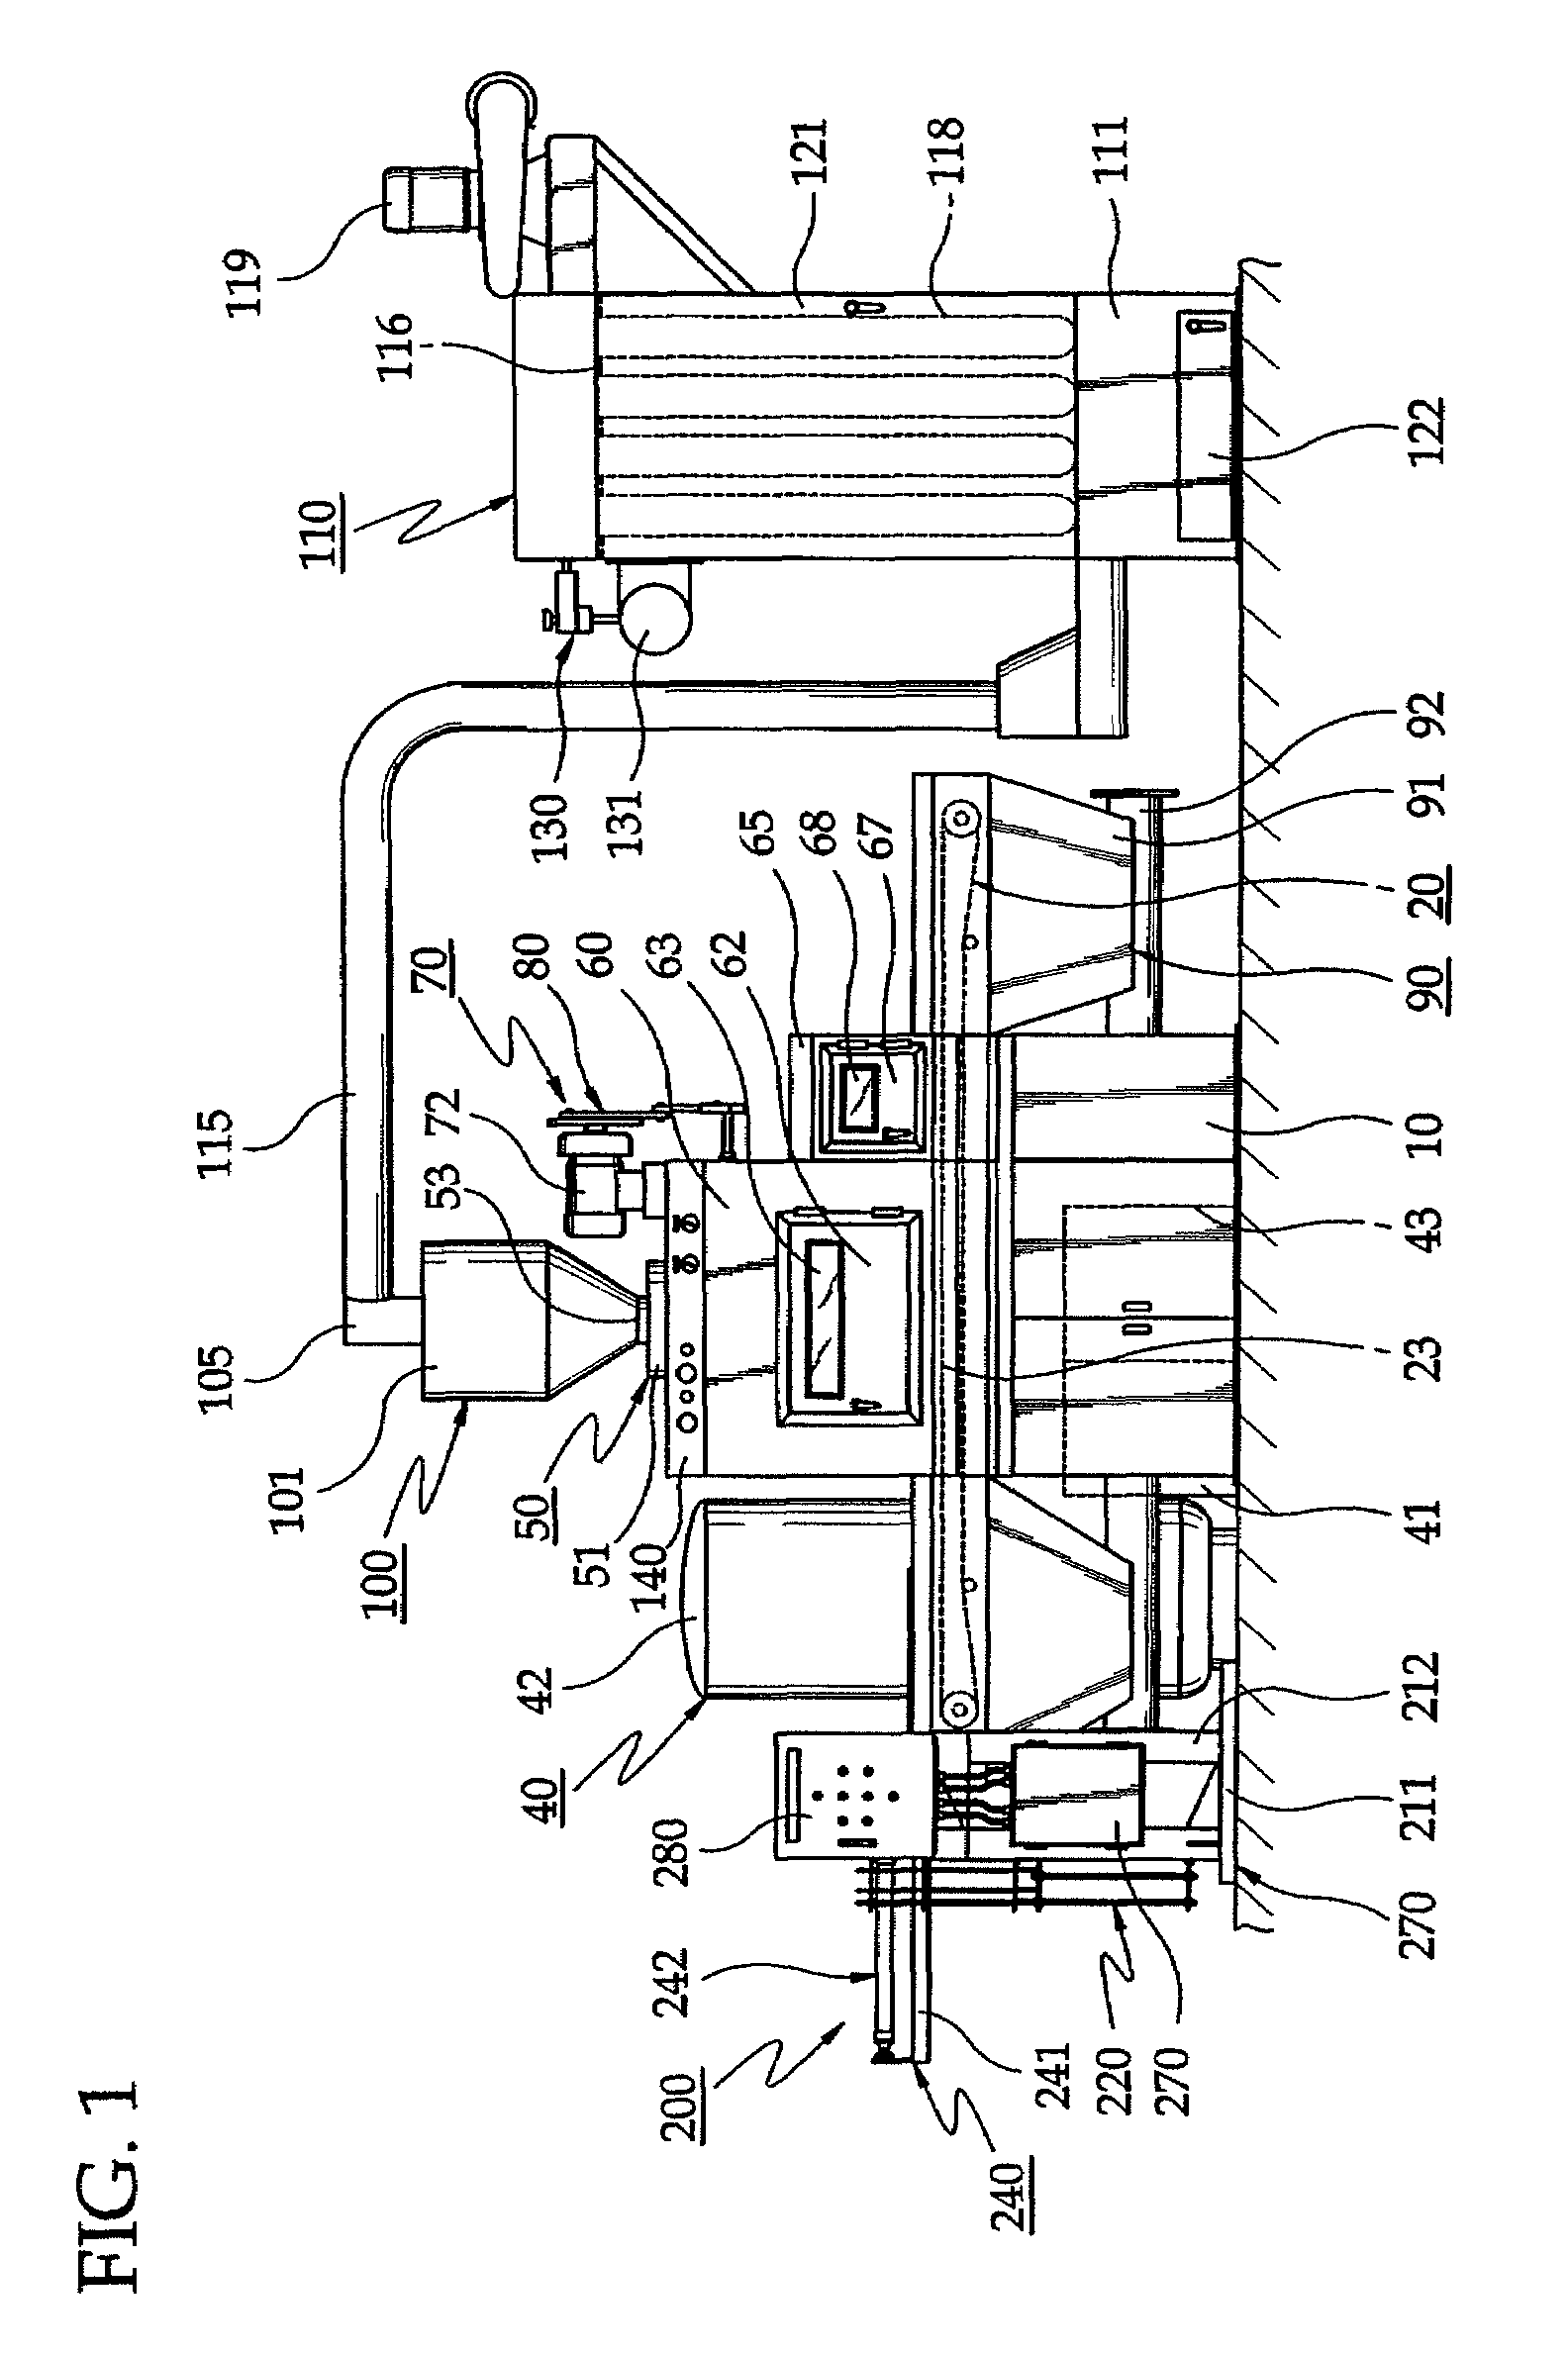 Semiconductor wafer regenerating system and method